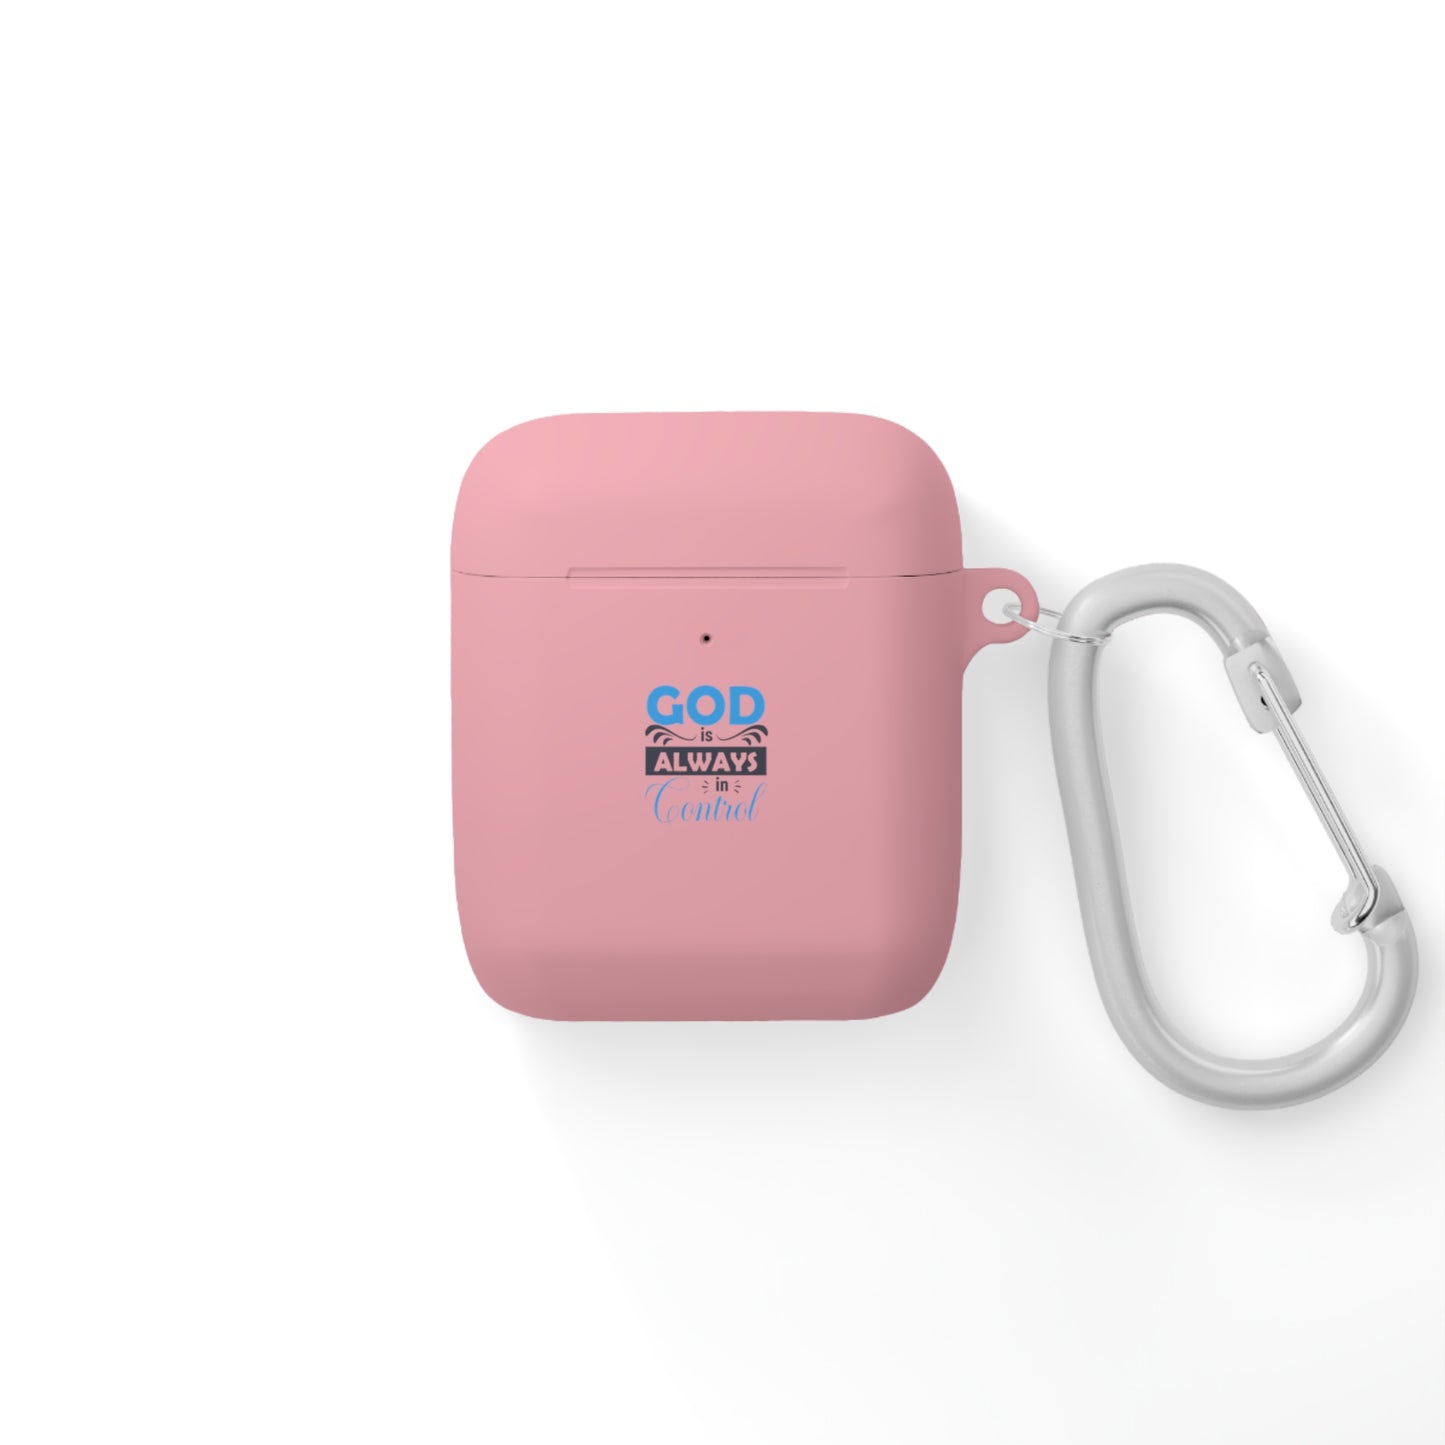 God Is Always In Control Airpod / Airpods Pro Case cover